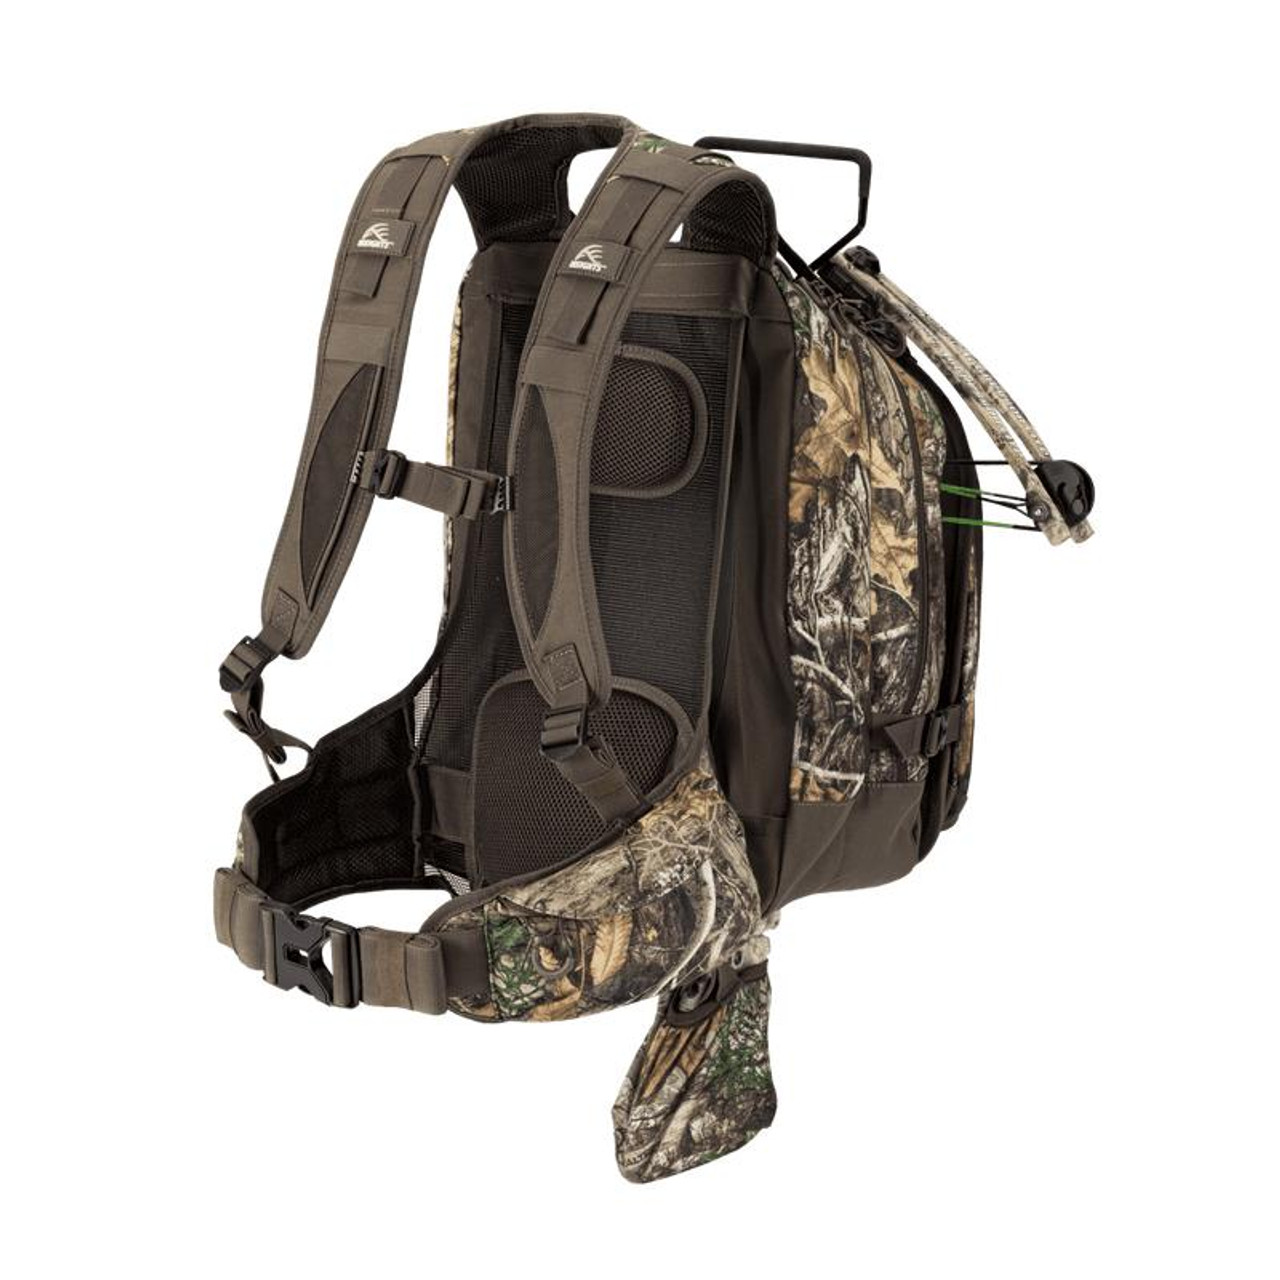 The Shift Crossbow Pack - Presleys Outdoors